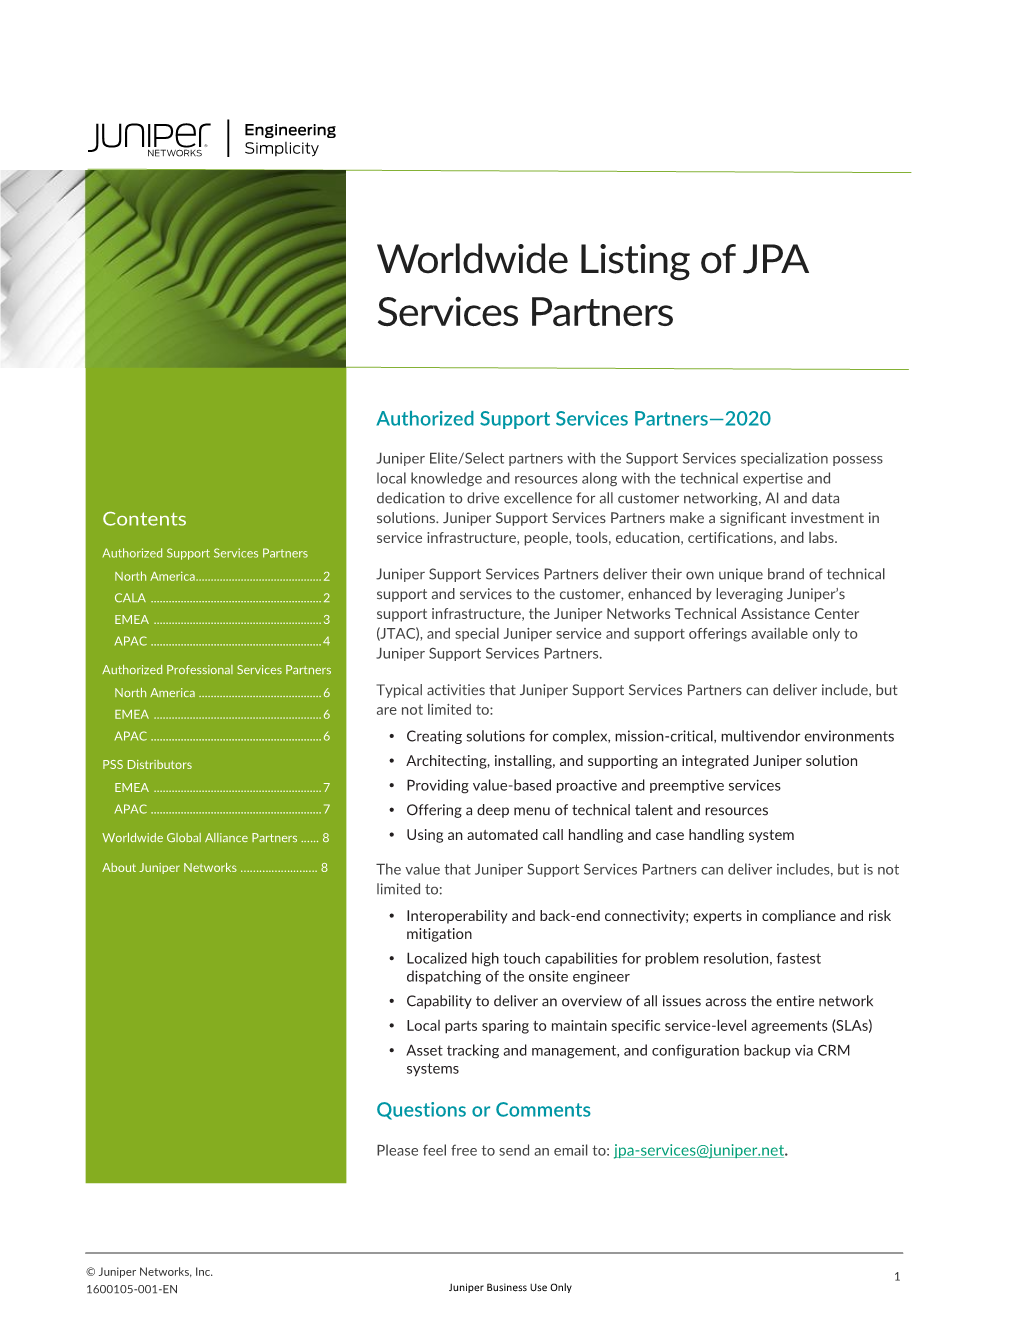 Worldwide Listing of JPA Services Partners